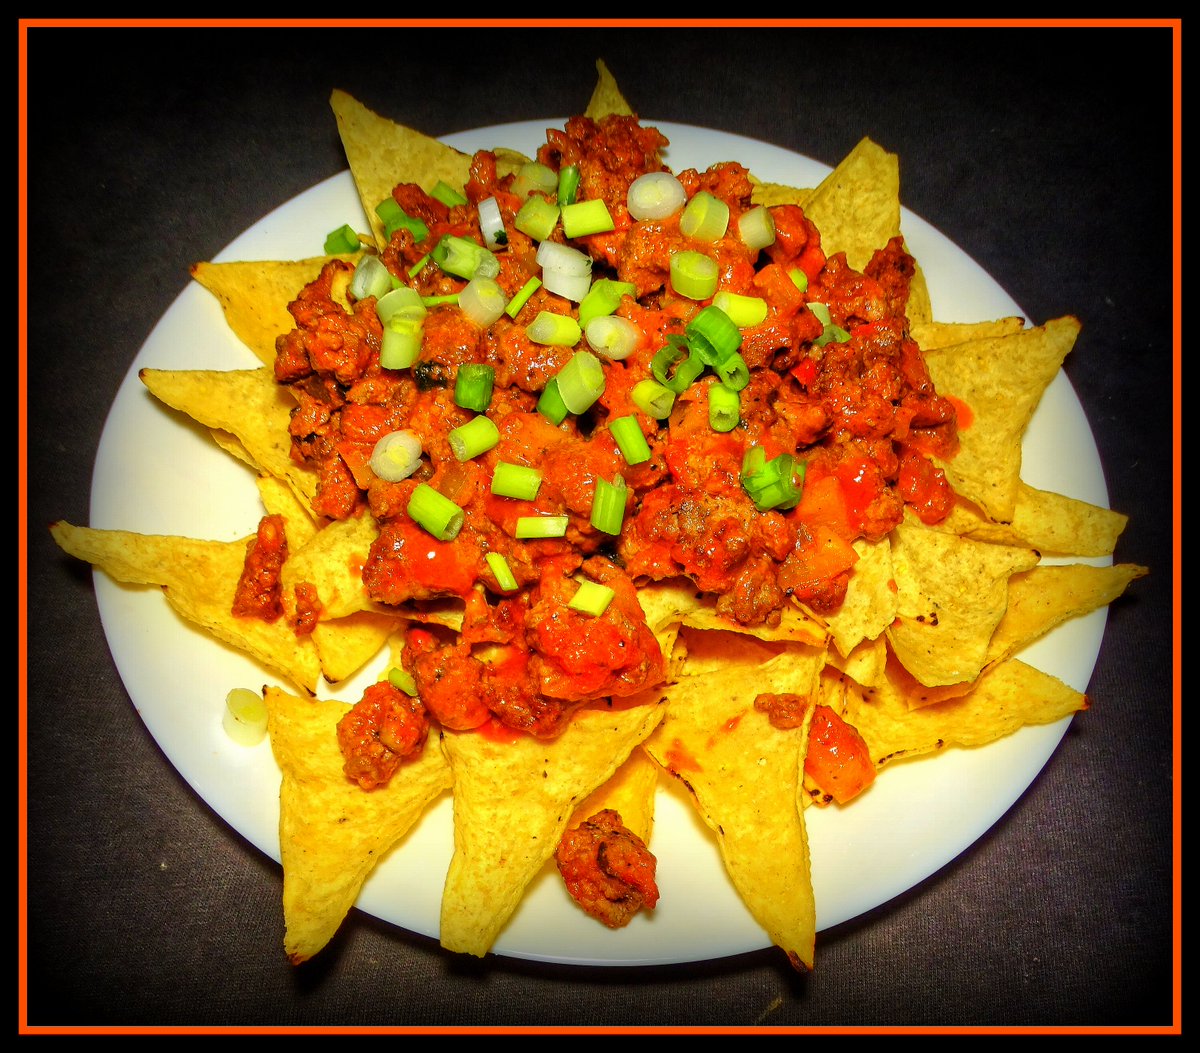 Hearty La Coulee Beef Nachos #dinerinmymind #homecooking #food #cookingathome #LaCoulee #beef #nachos #tortillachips #lacocinafoods #onions #garlic #bellpeppers #jalapenopeppers #greenonions #jackcheese #tomato #cumin #cilantro #lime #V8    #shoppinglocal #Manitoba